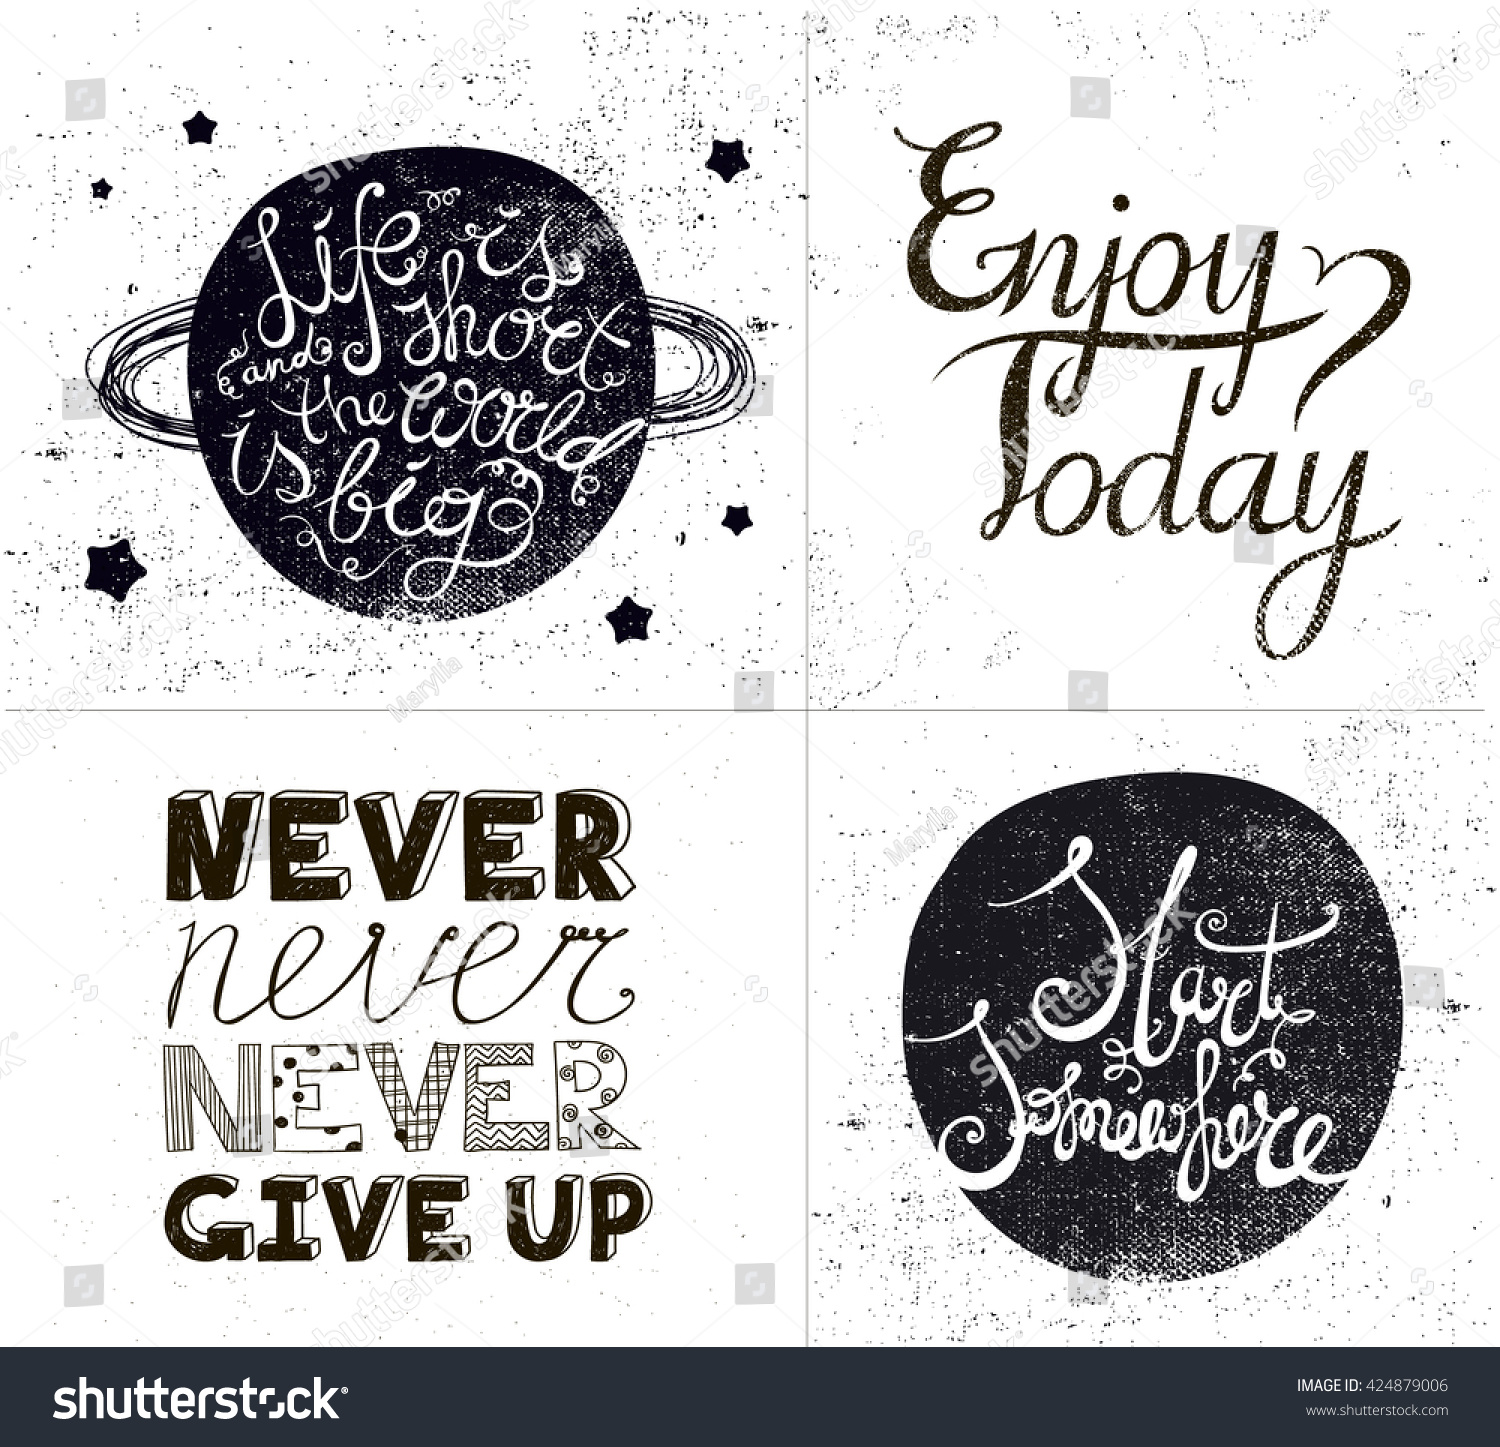 Vector set of inspirational quotes hand drawn textured sayings Enjoy today start